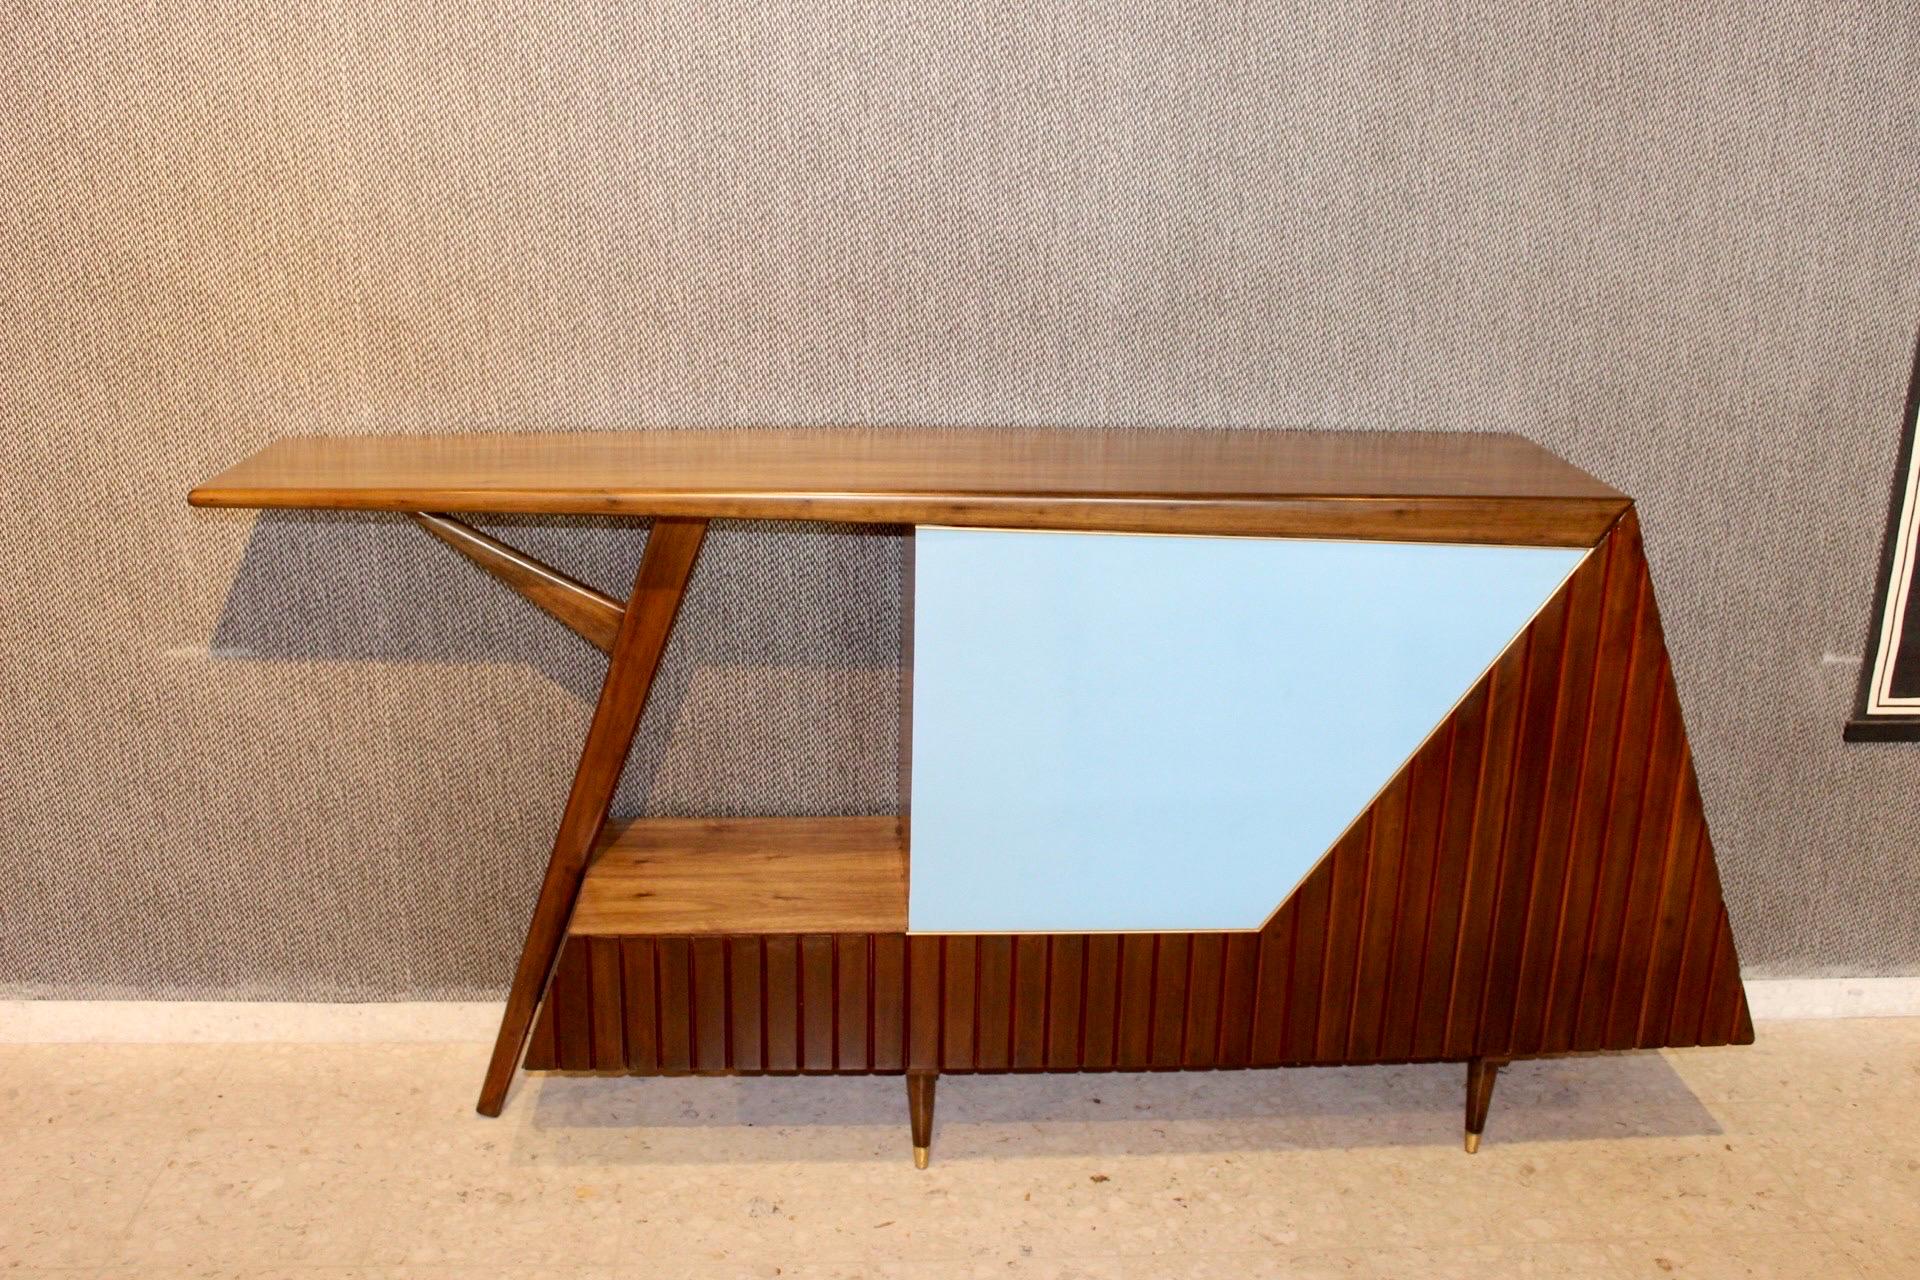 For your consideration, Mid-Century Modern bar made in Mexico in the 60s.
   